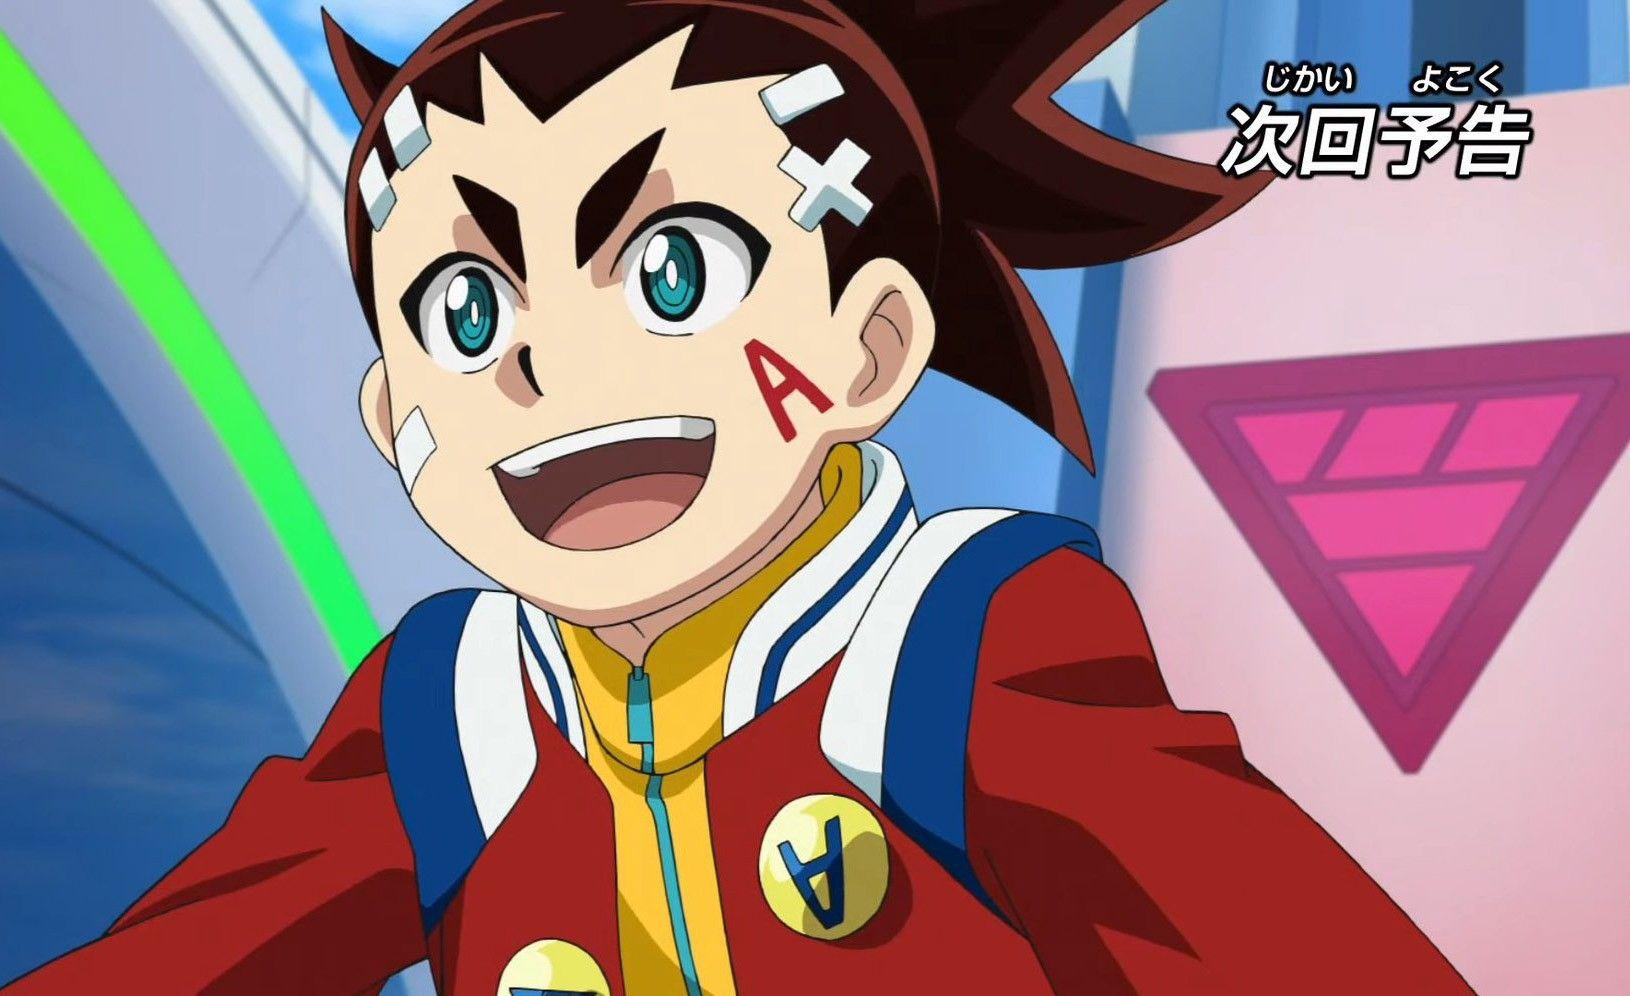 Aiga Akaba is going to make a return in Beyblade Burst GT